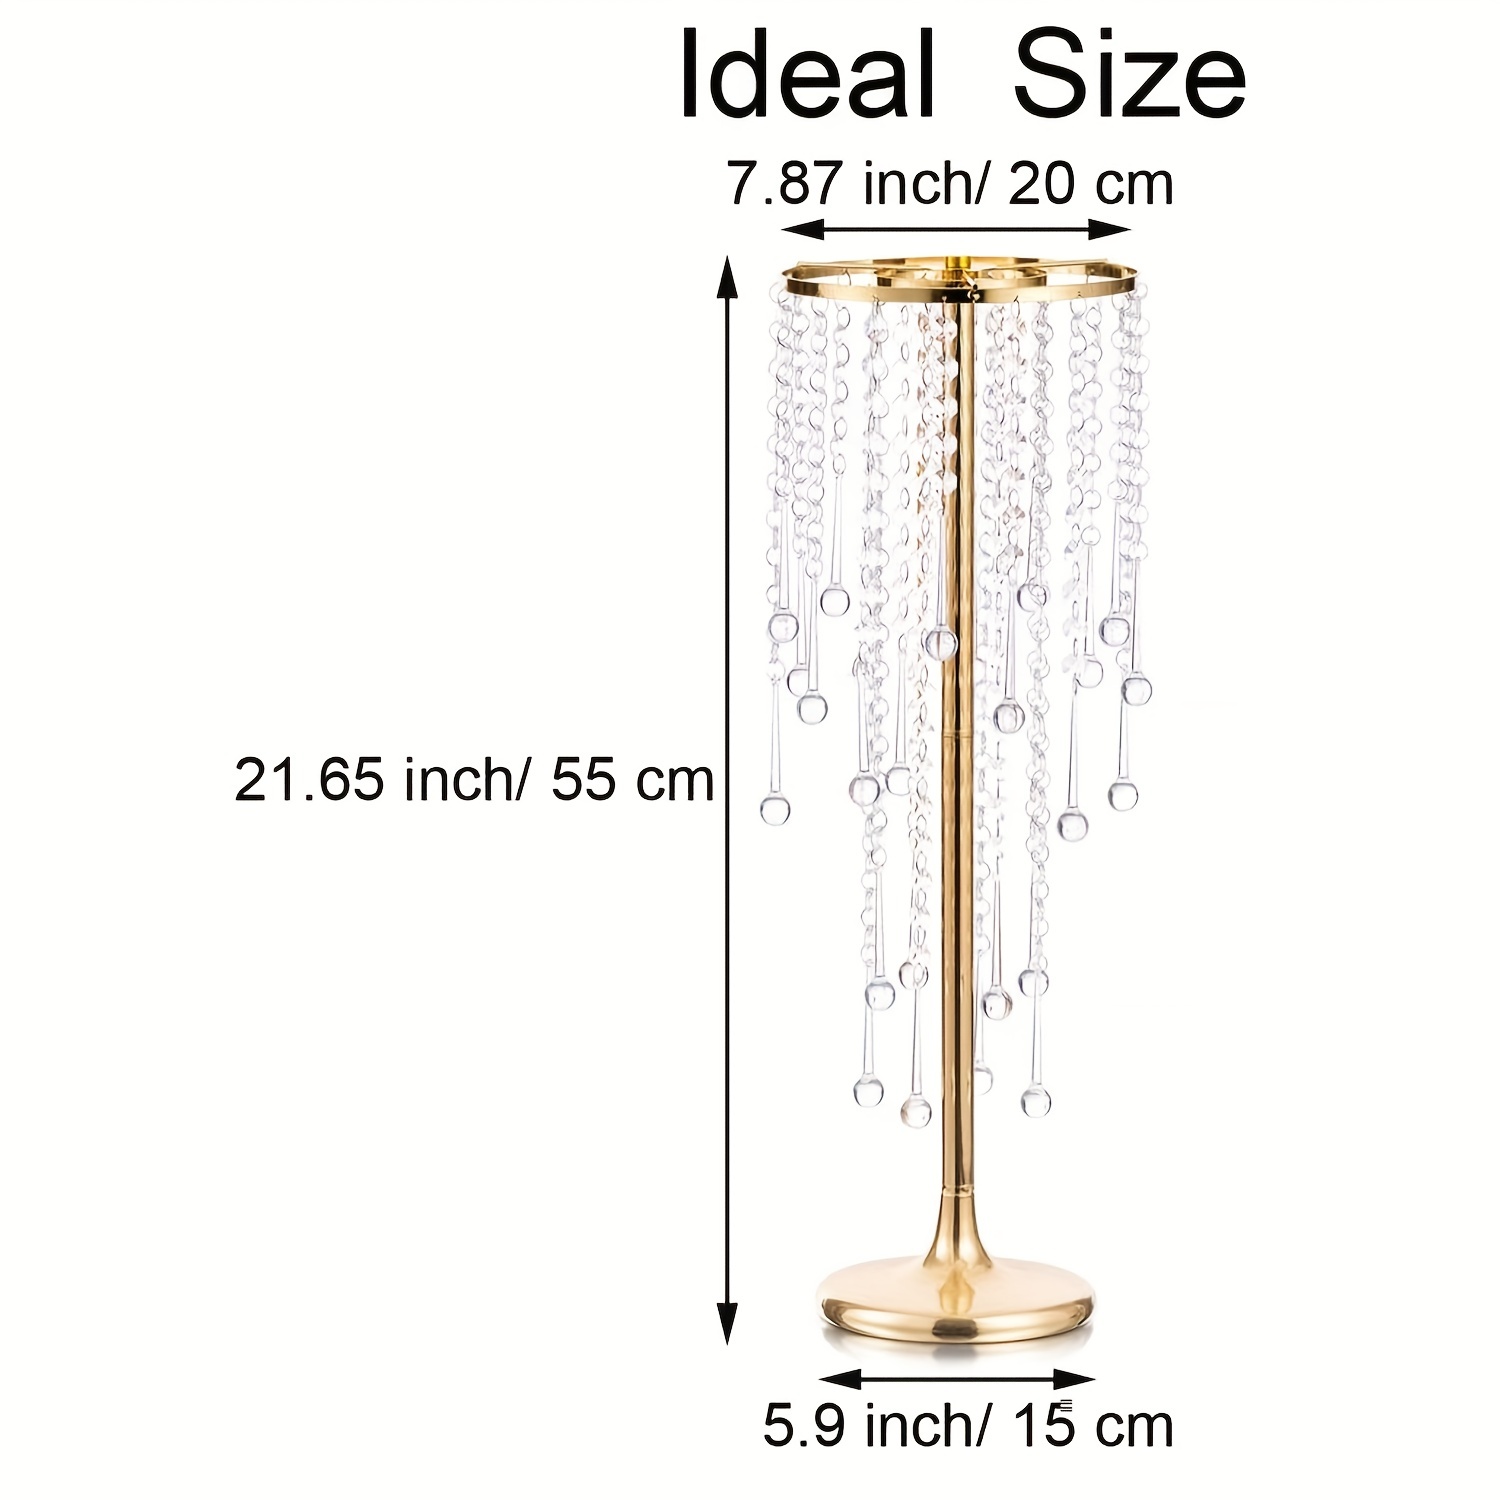  2 Pcs 21.3 inches Tall Crystal Flower Stand Wedding Road Lead  Tall Flower Holders Centerpiece Crystal Flower Chandelier Metal Flower Vase  for Reception Tables Wedding Supplies : Home & Kitchen